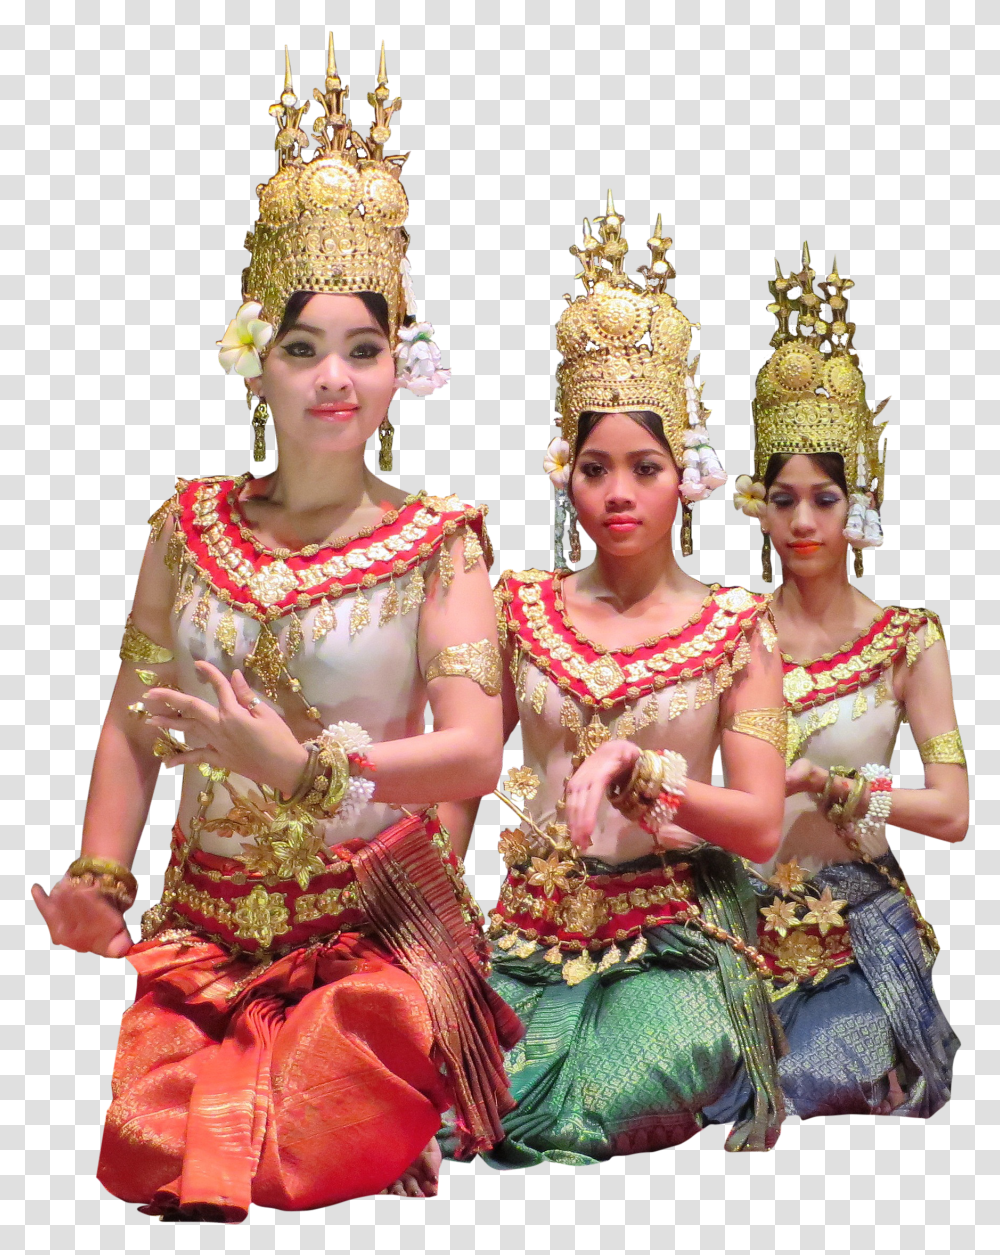 Dance Dancing Couple Arts Show People Pngs Cambodia Transparent Png